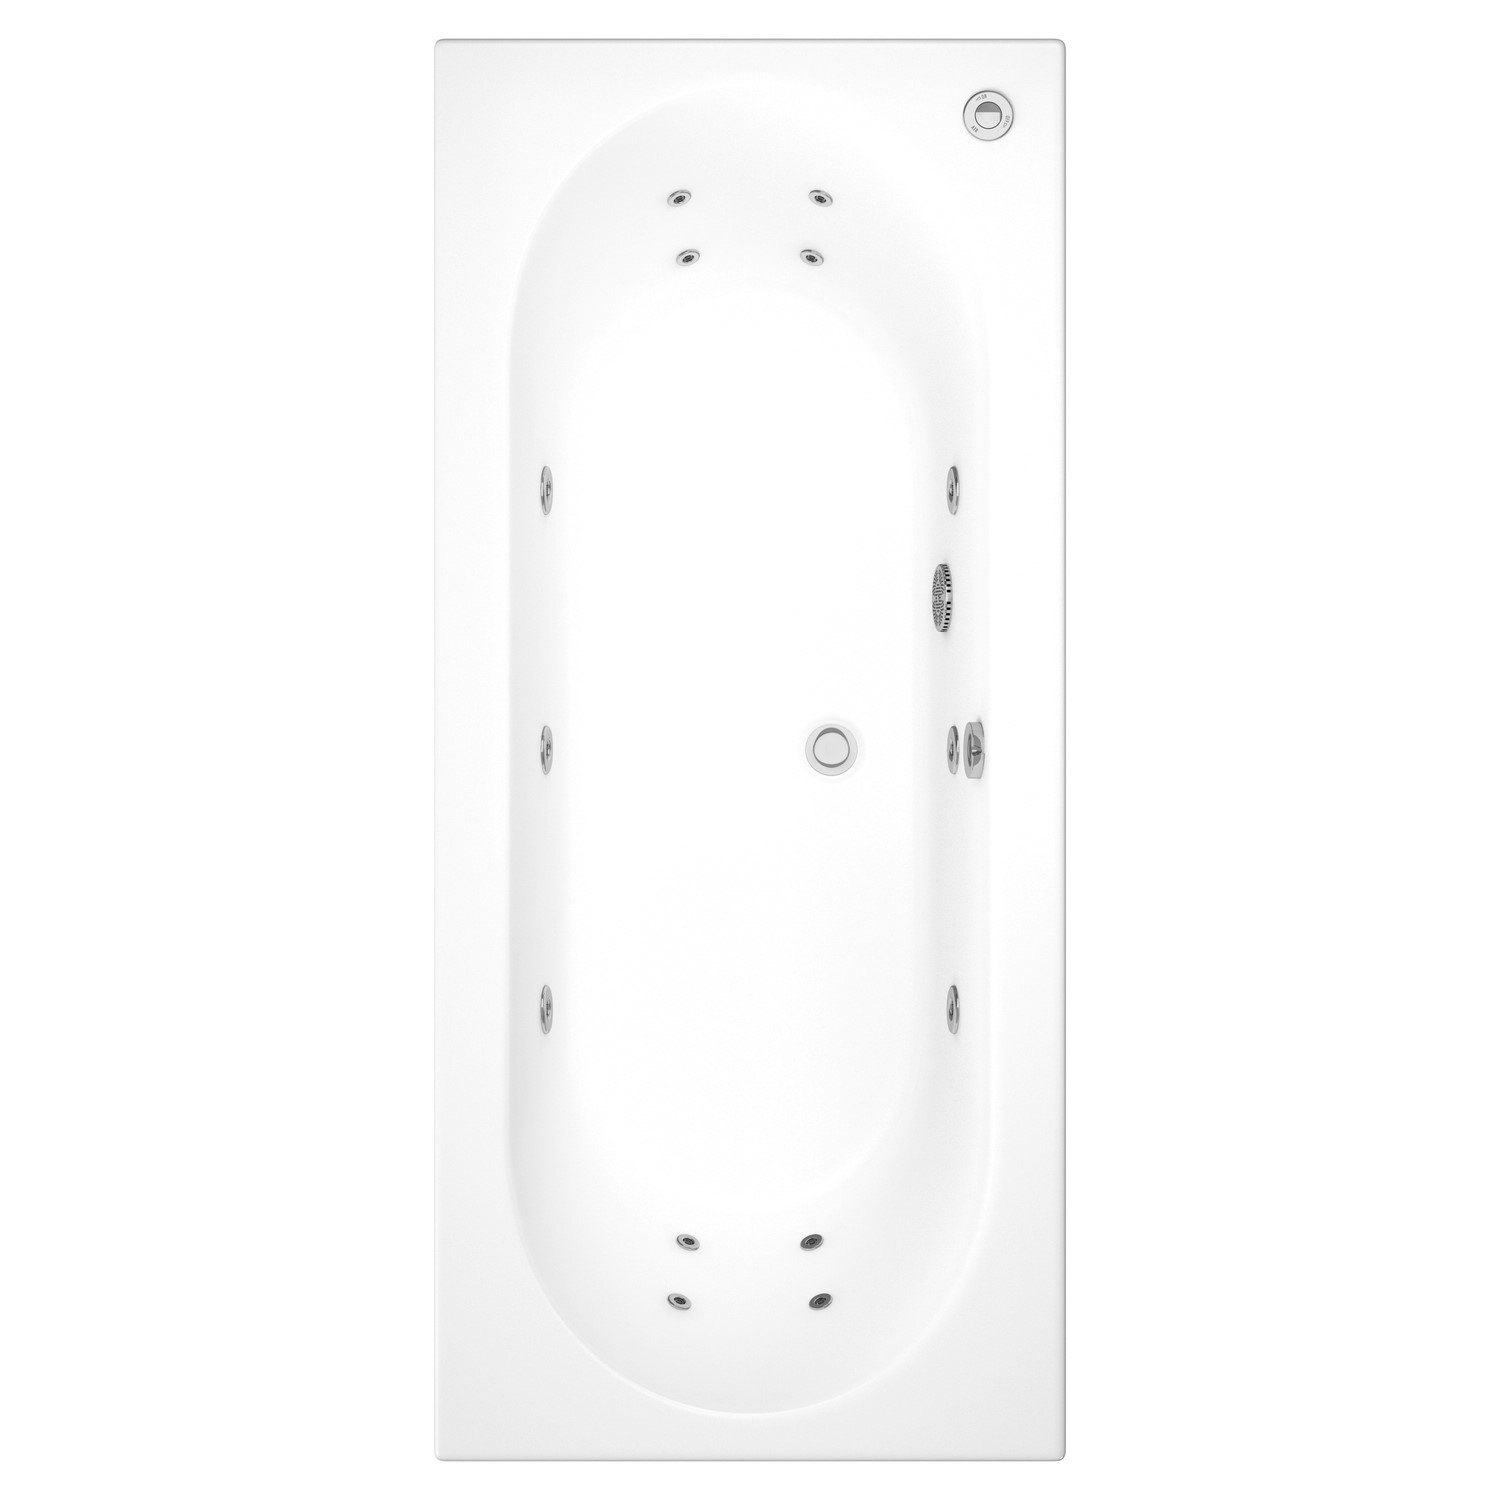 Burford Double Ended Bath with 14 Jet Whirlpool System - 1800 x 800mm